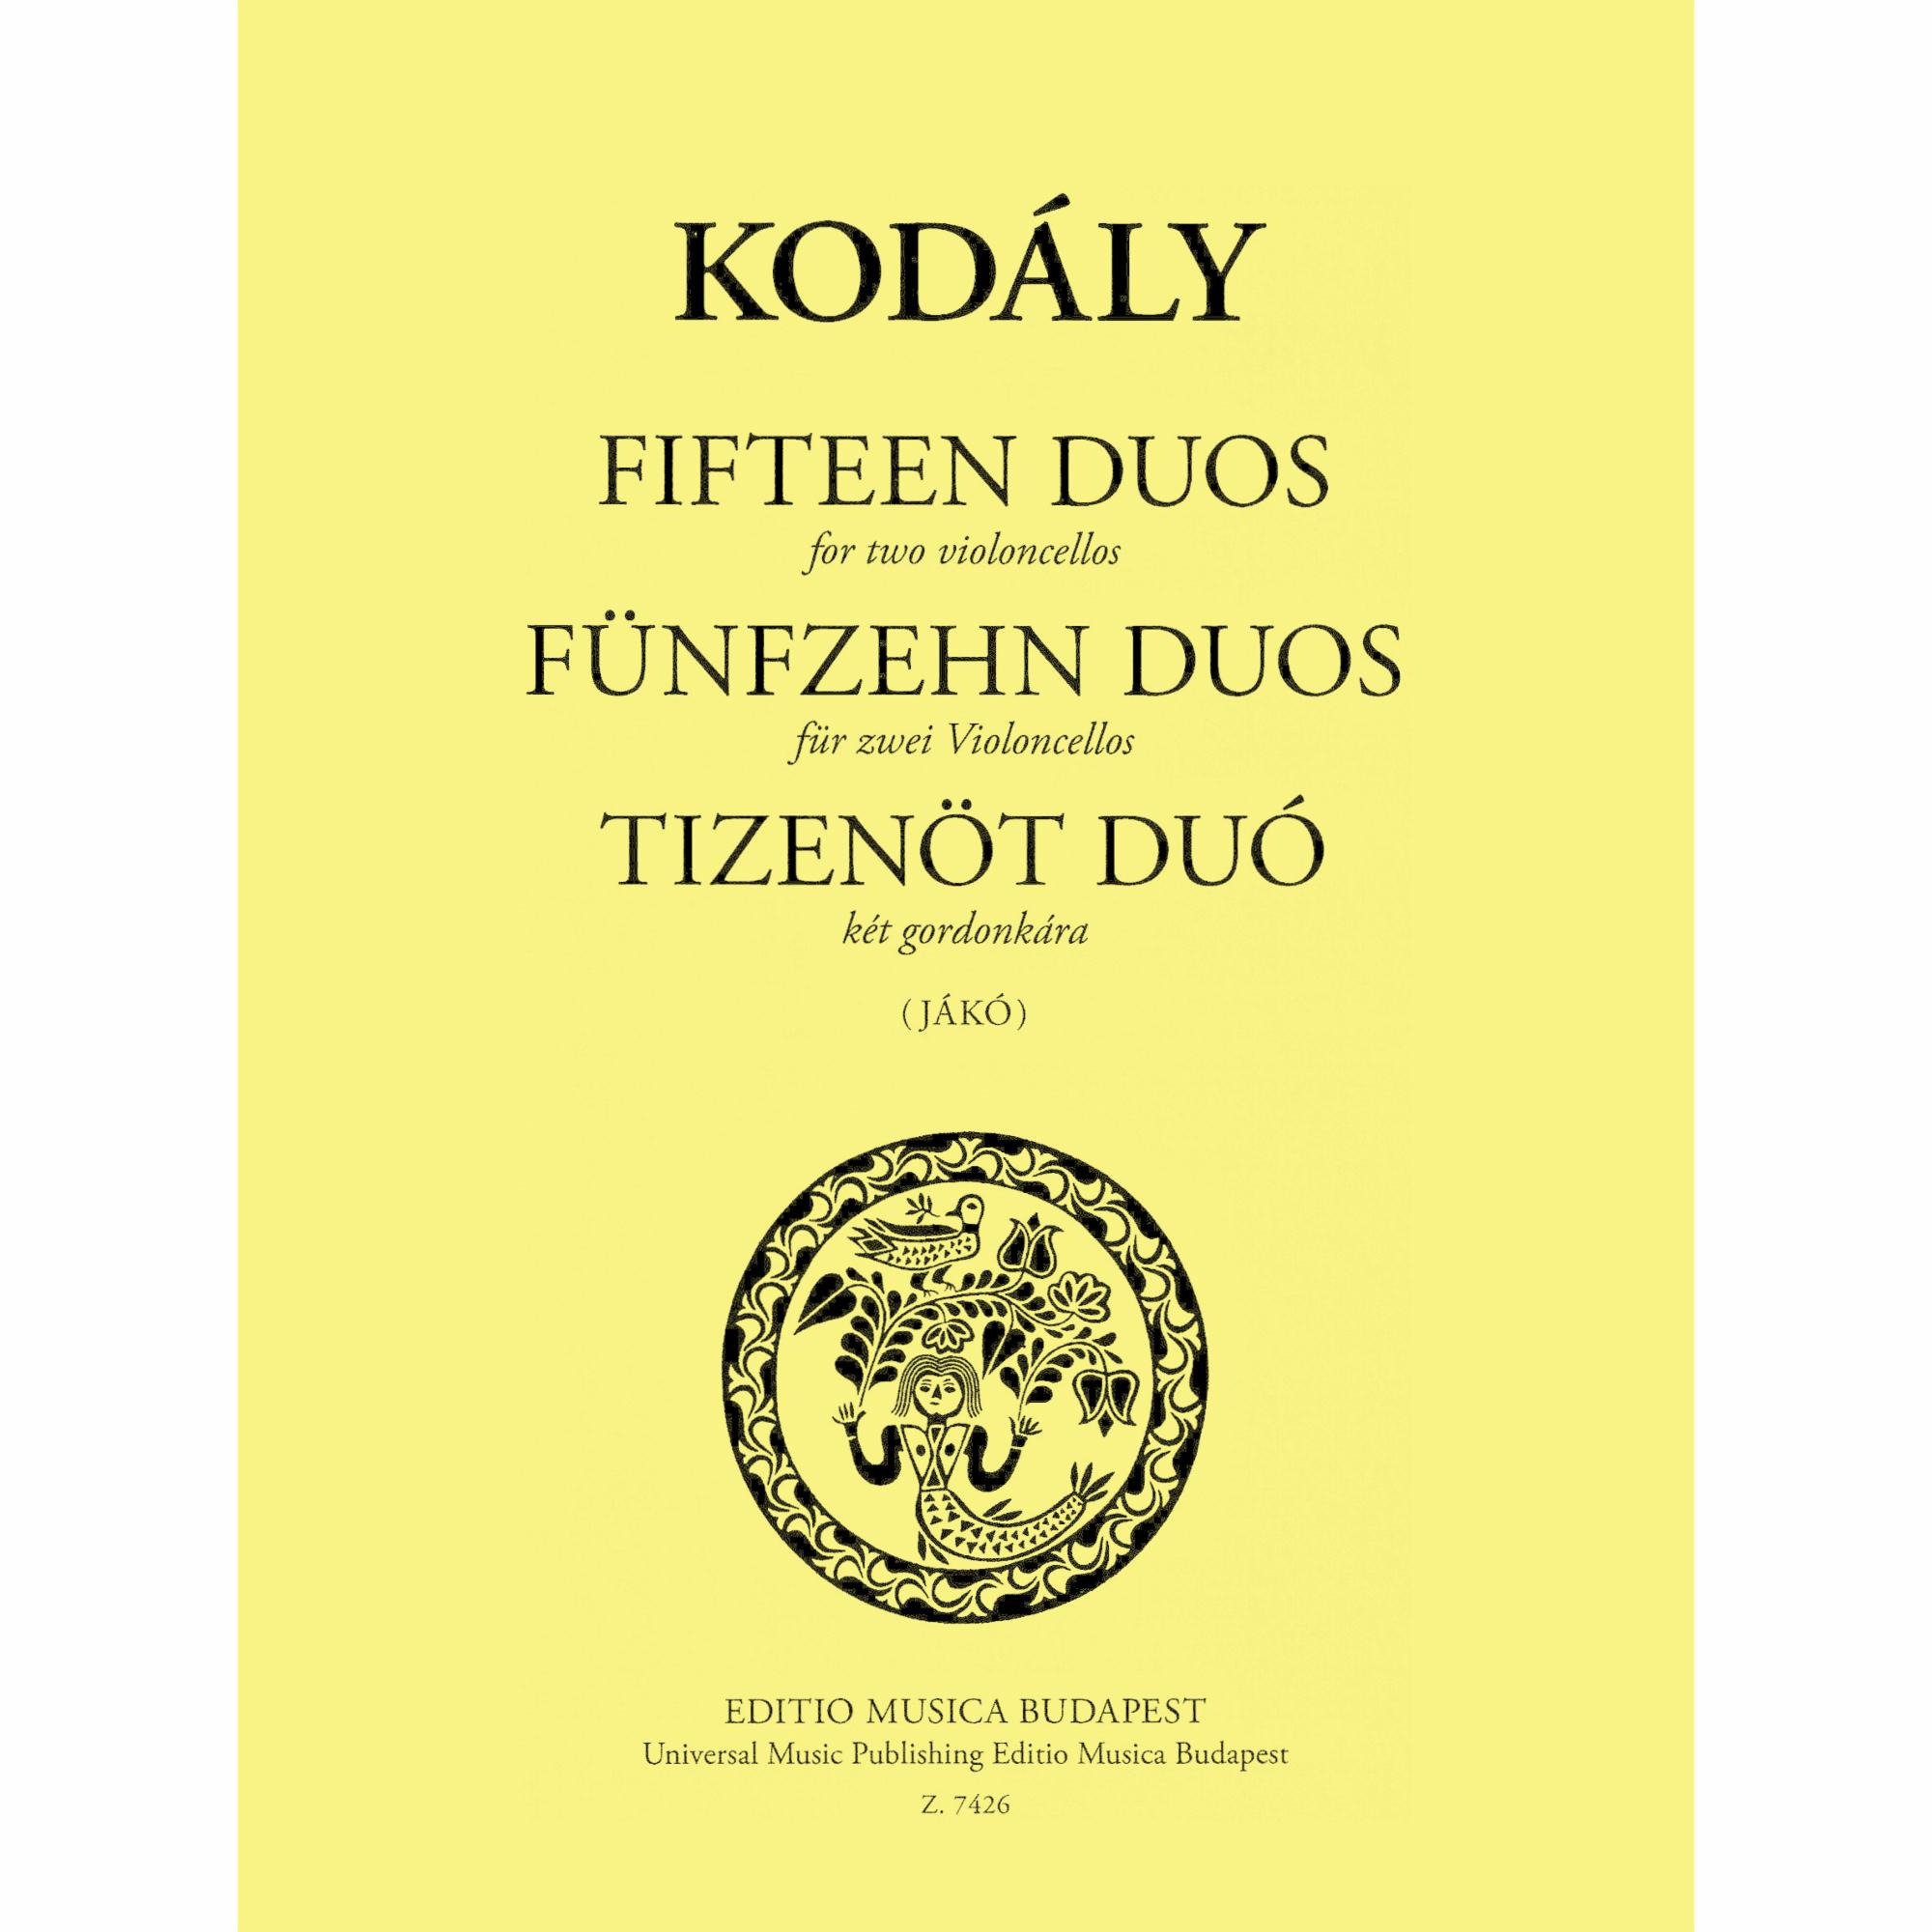 Kodaly -- Fifteen Duos for Two Cellos